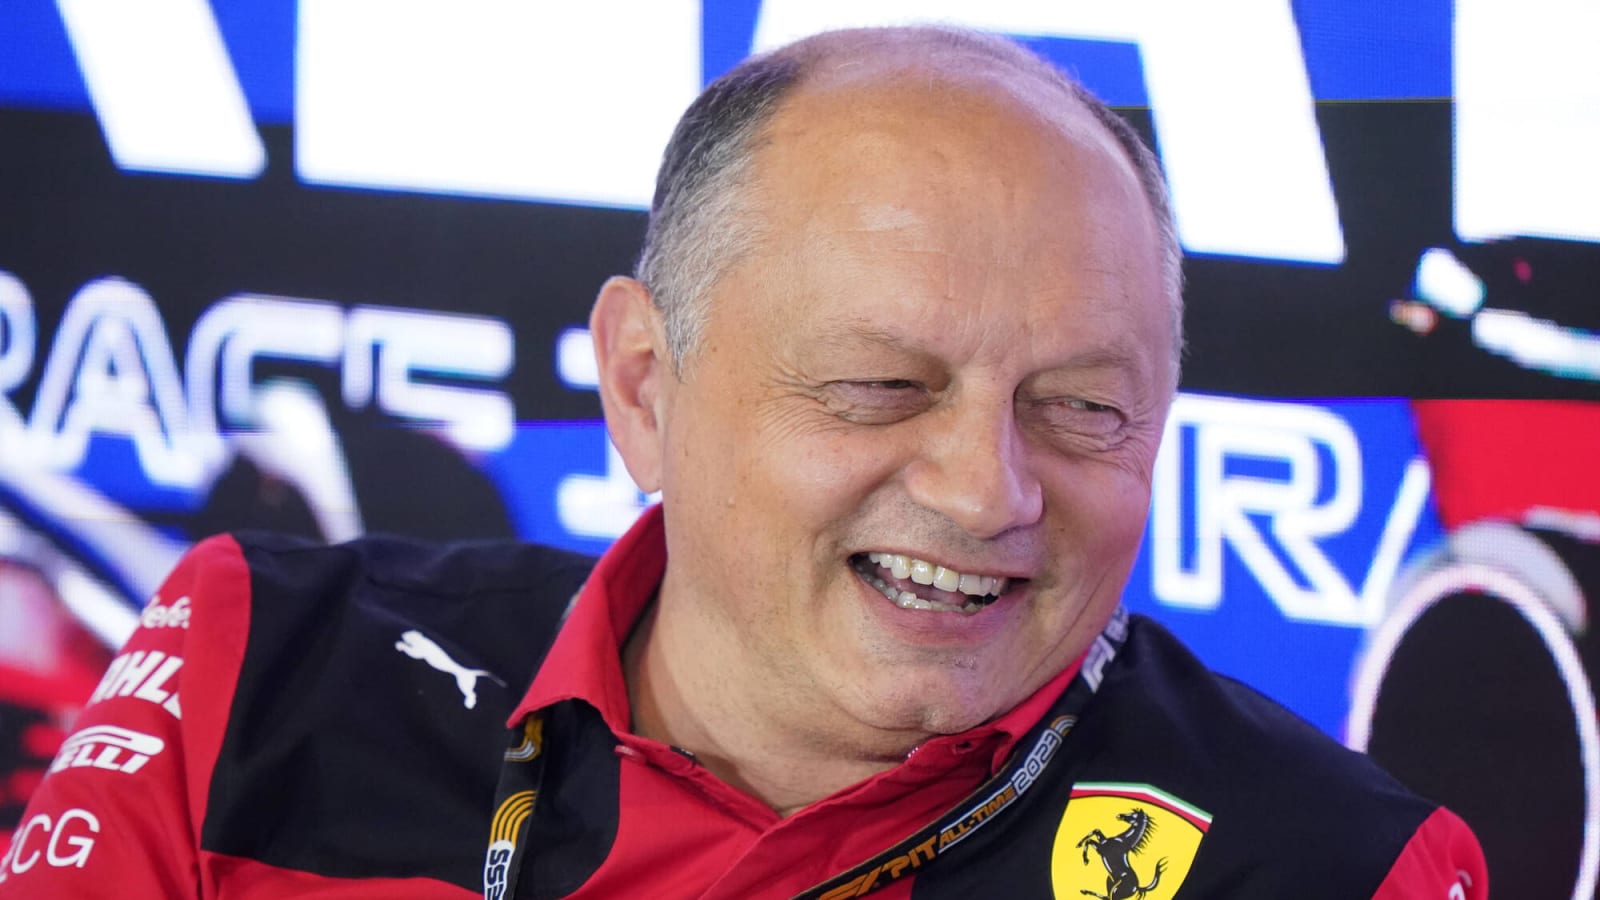 Watch: Fred Vasseur gives a hilarious reaction as fans tell him they’re waiting for Adrian Newey to join Ferrari